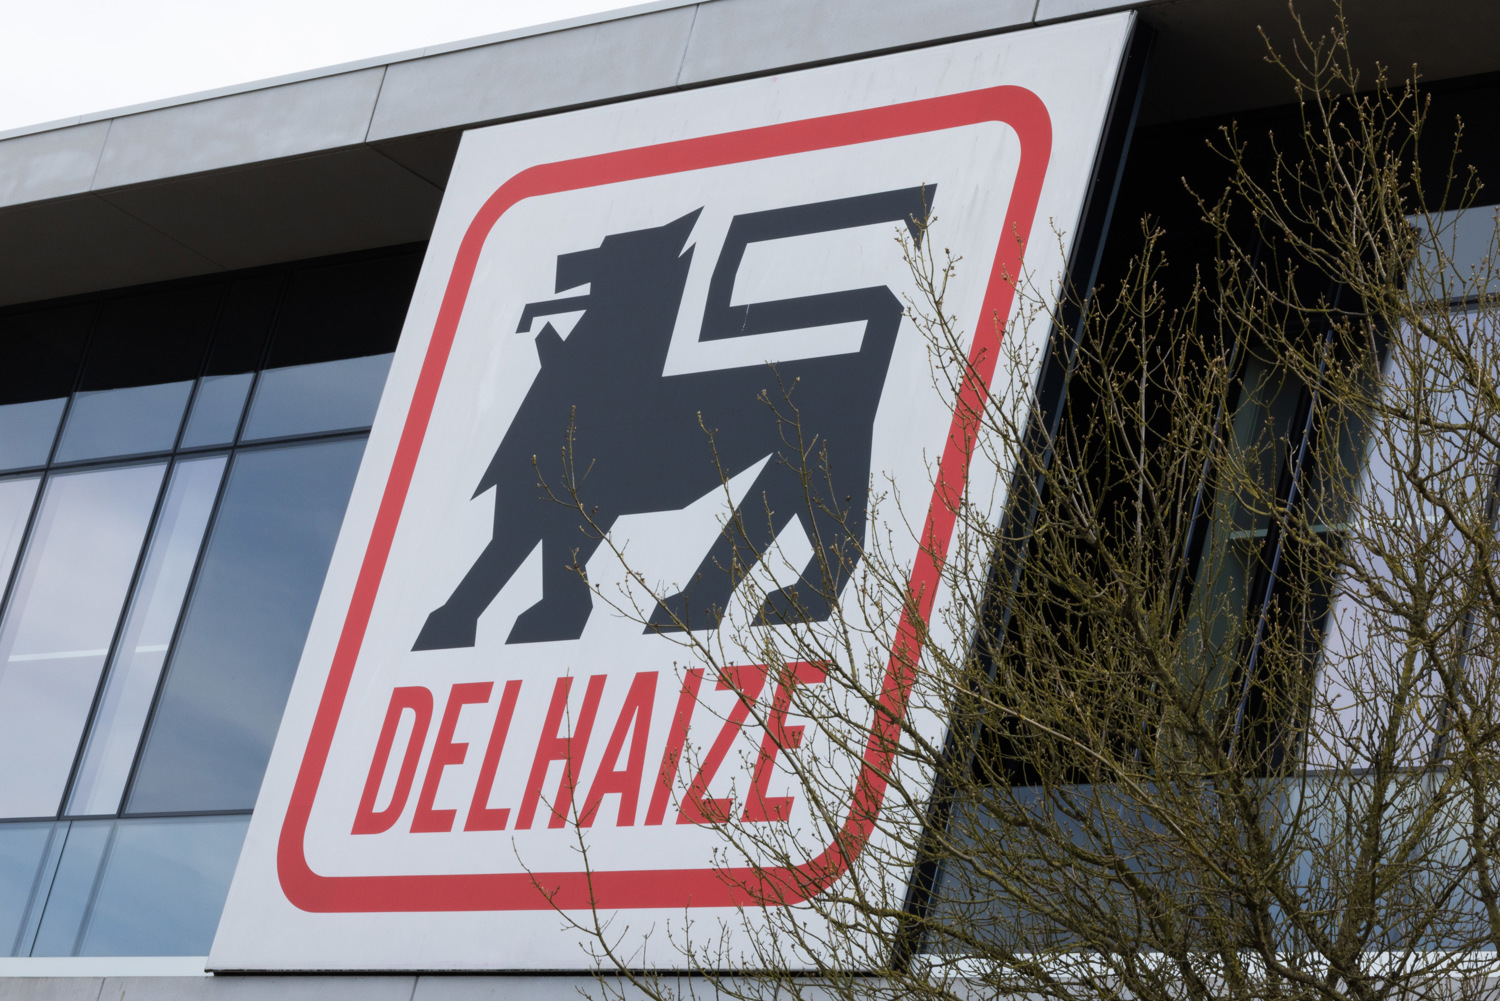 New strike action in Brussels over Delhaize franchising announcement